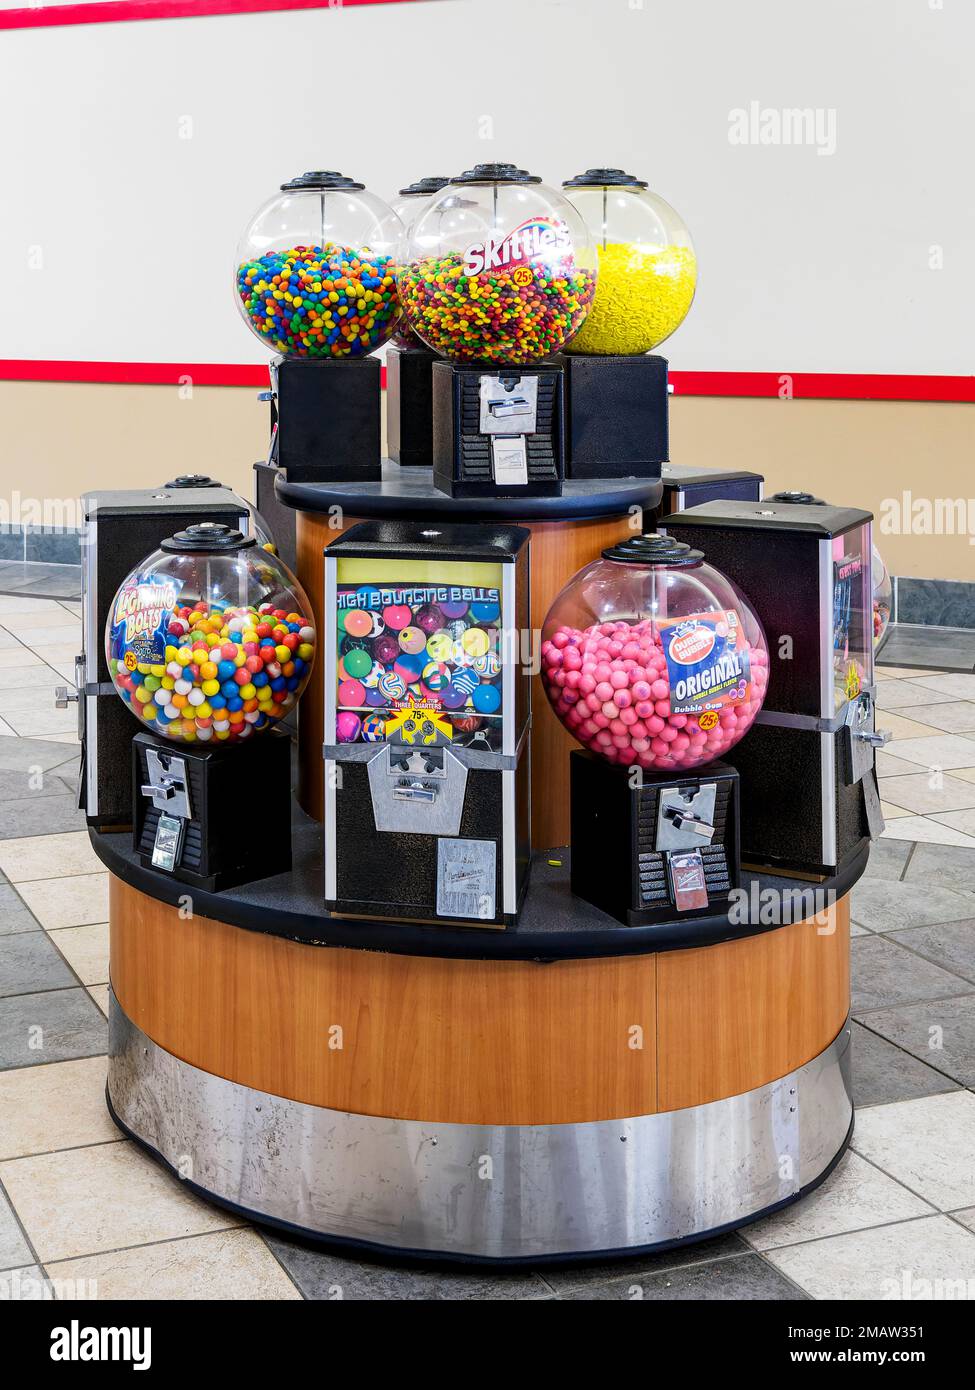 Gumball or candy machines with bright colored candy for kids and adults in a shopping mall in Montgomery Alabama, USA. Stock Photo